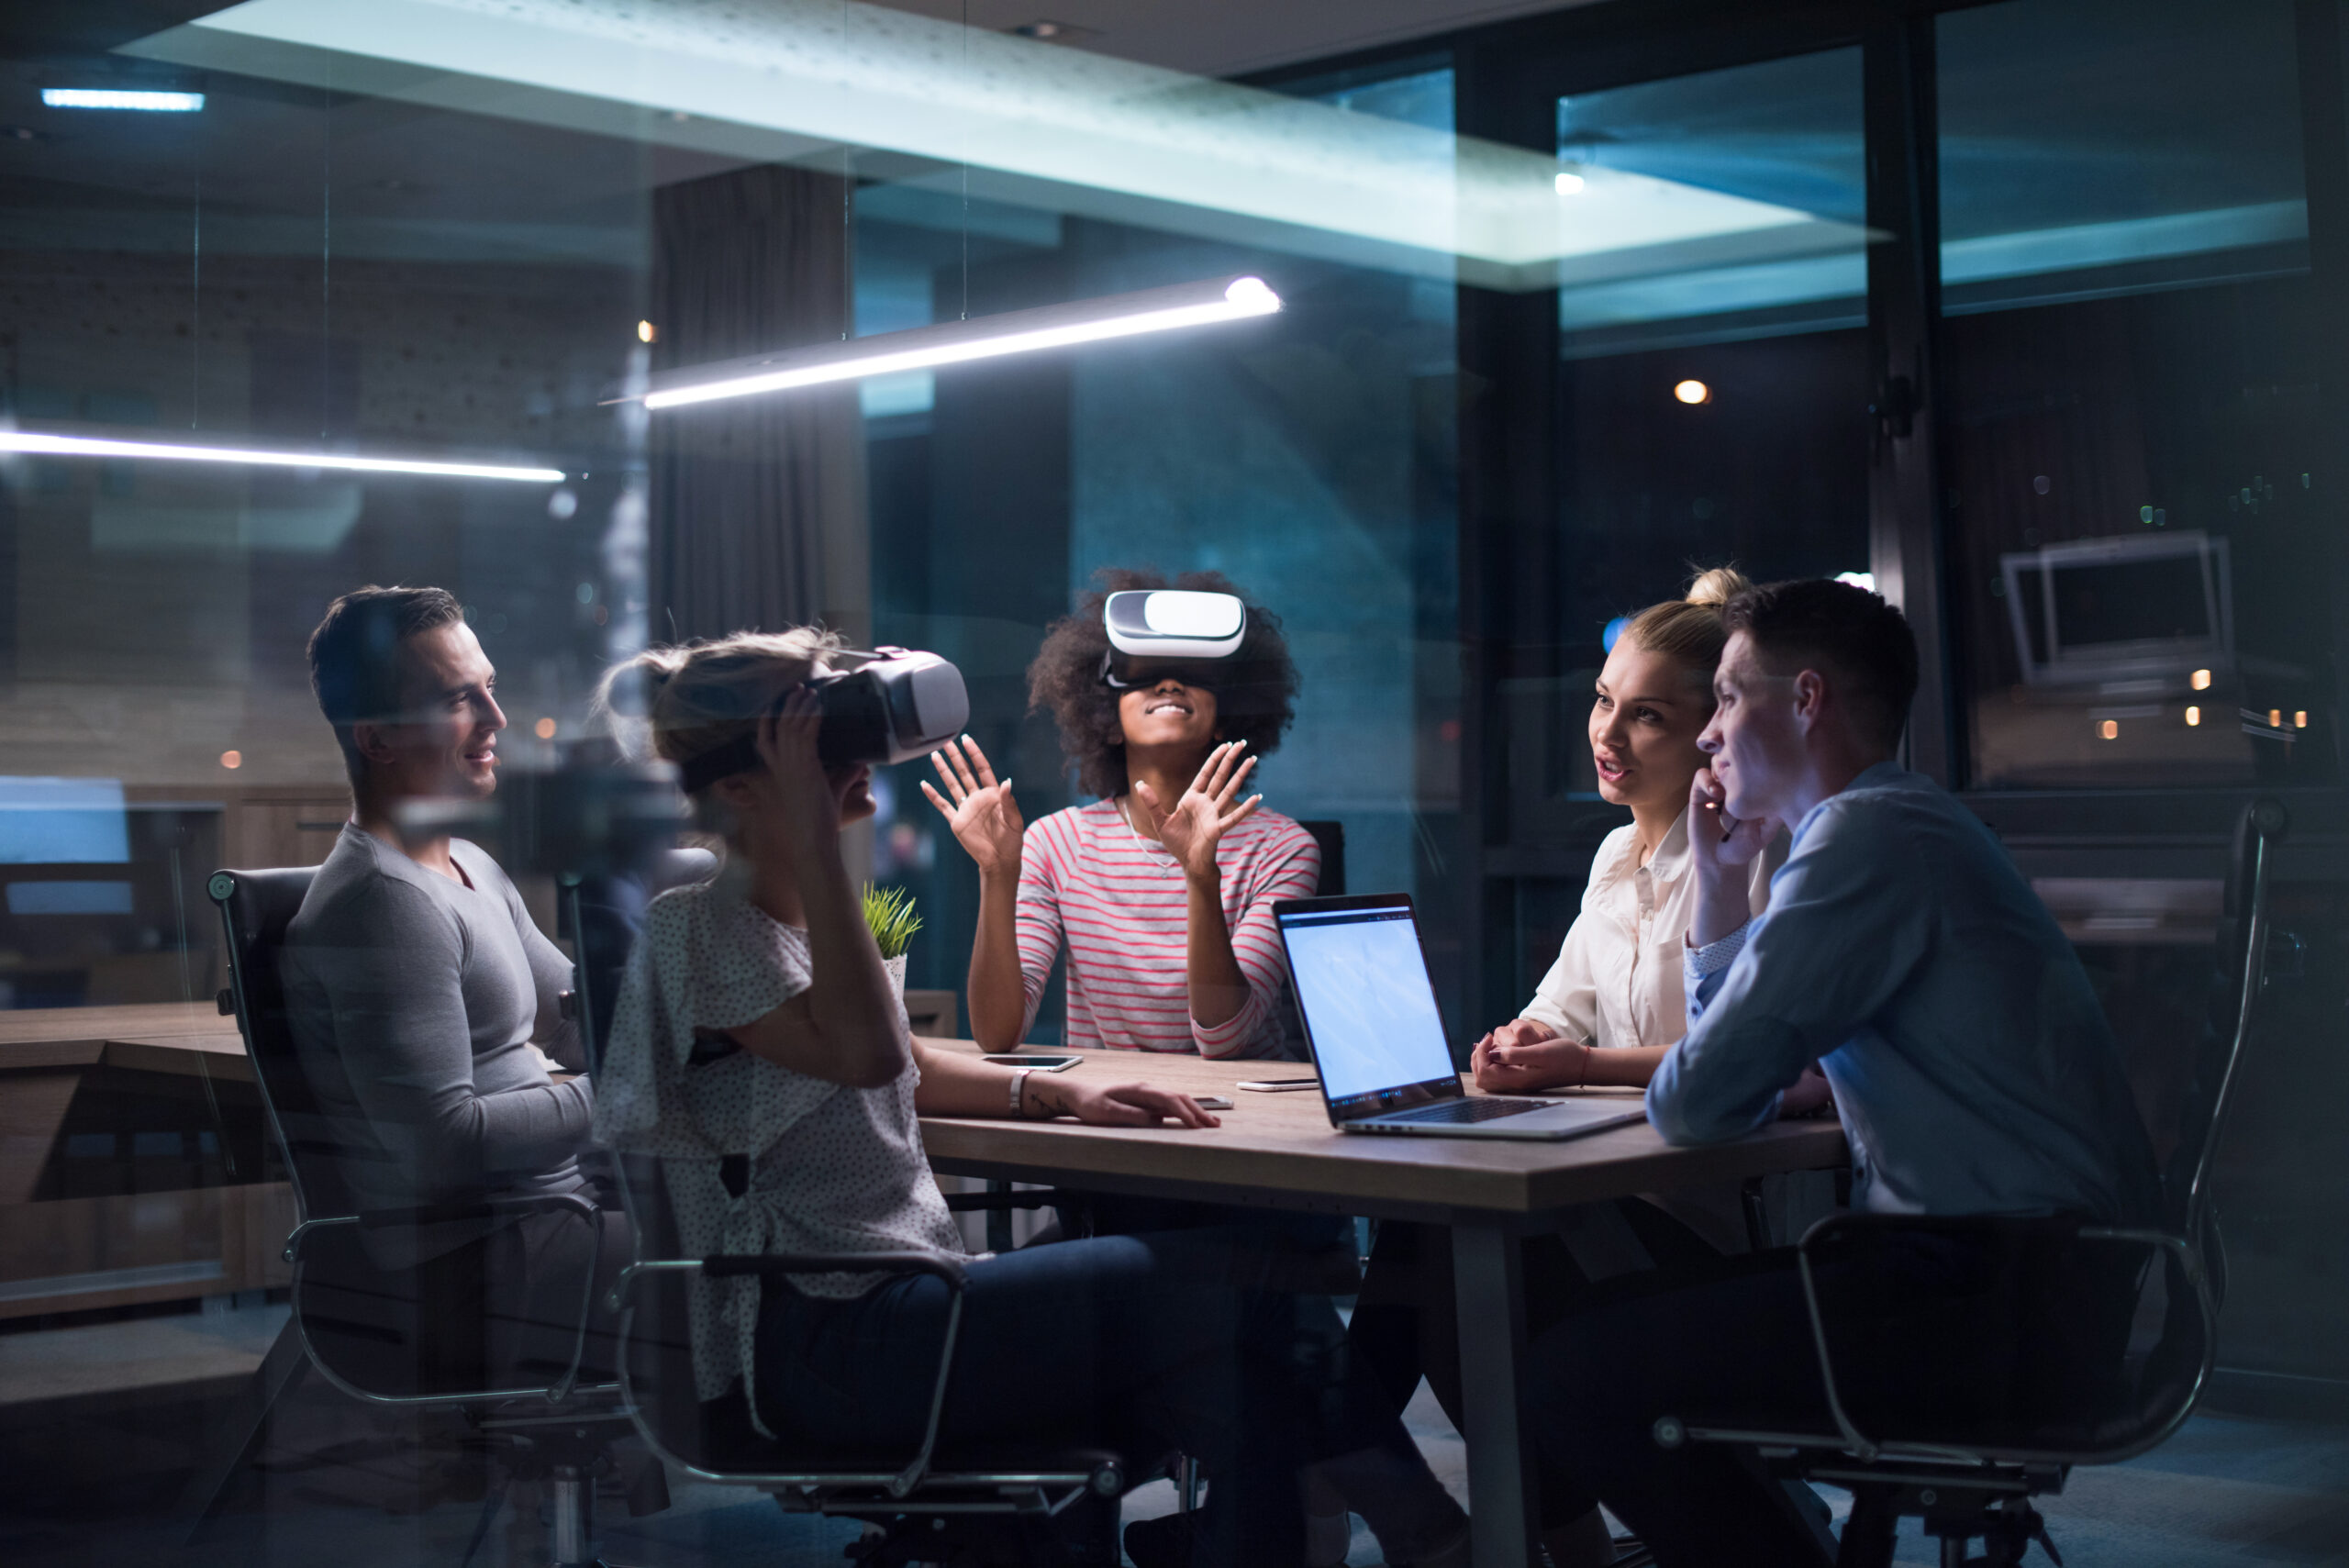 How can VR help develop hard skills?